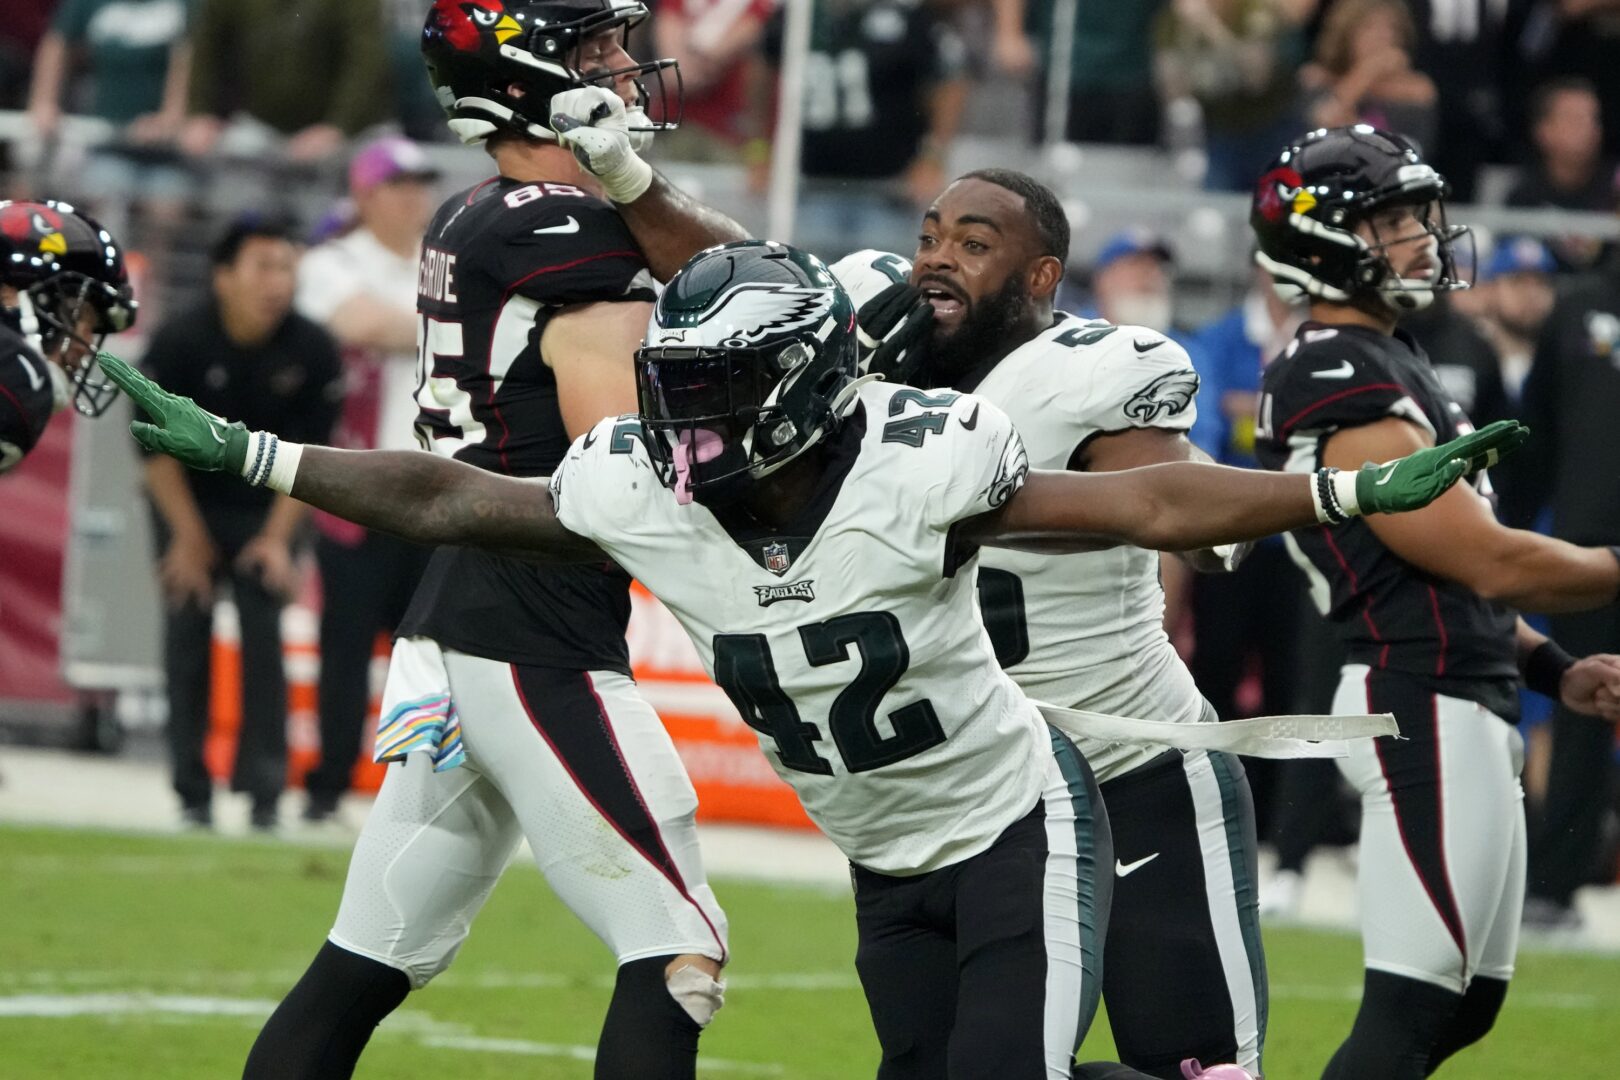 Eagles stay undefeated, hang on to beat Cardinals 20-17